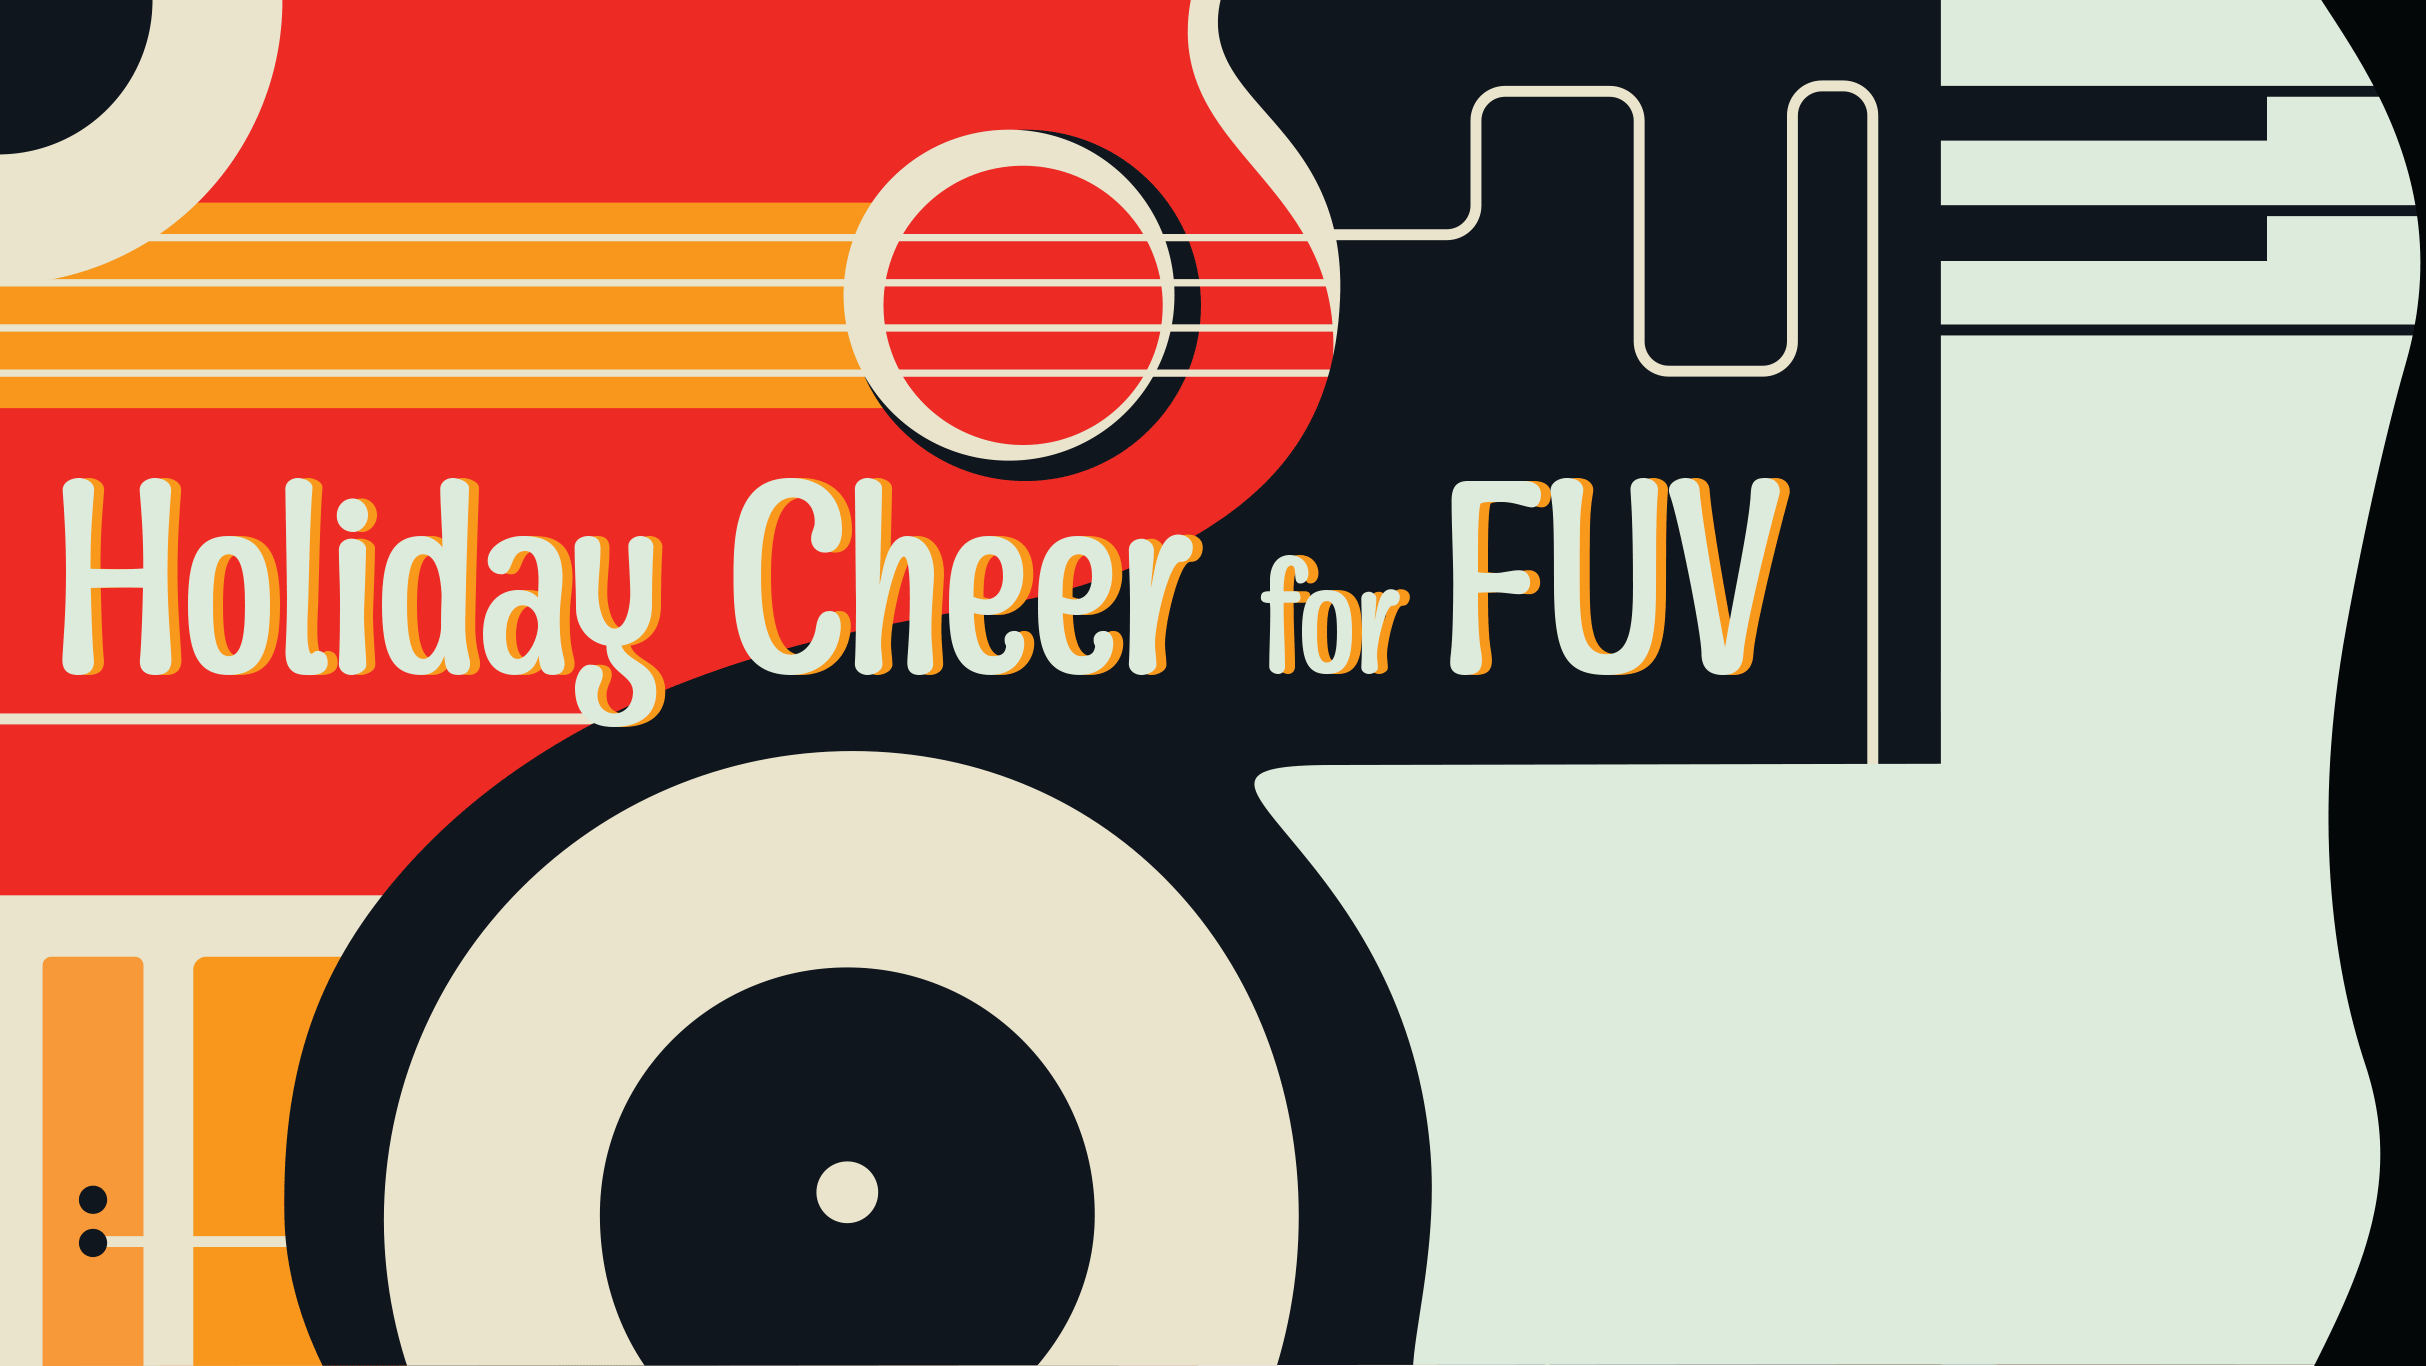 Holiday Cheer for FUV free presale password for early tickets in New York